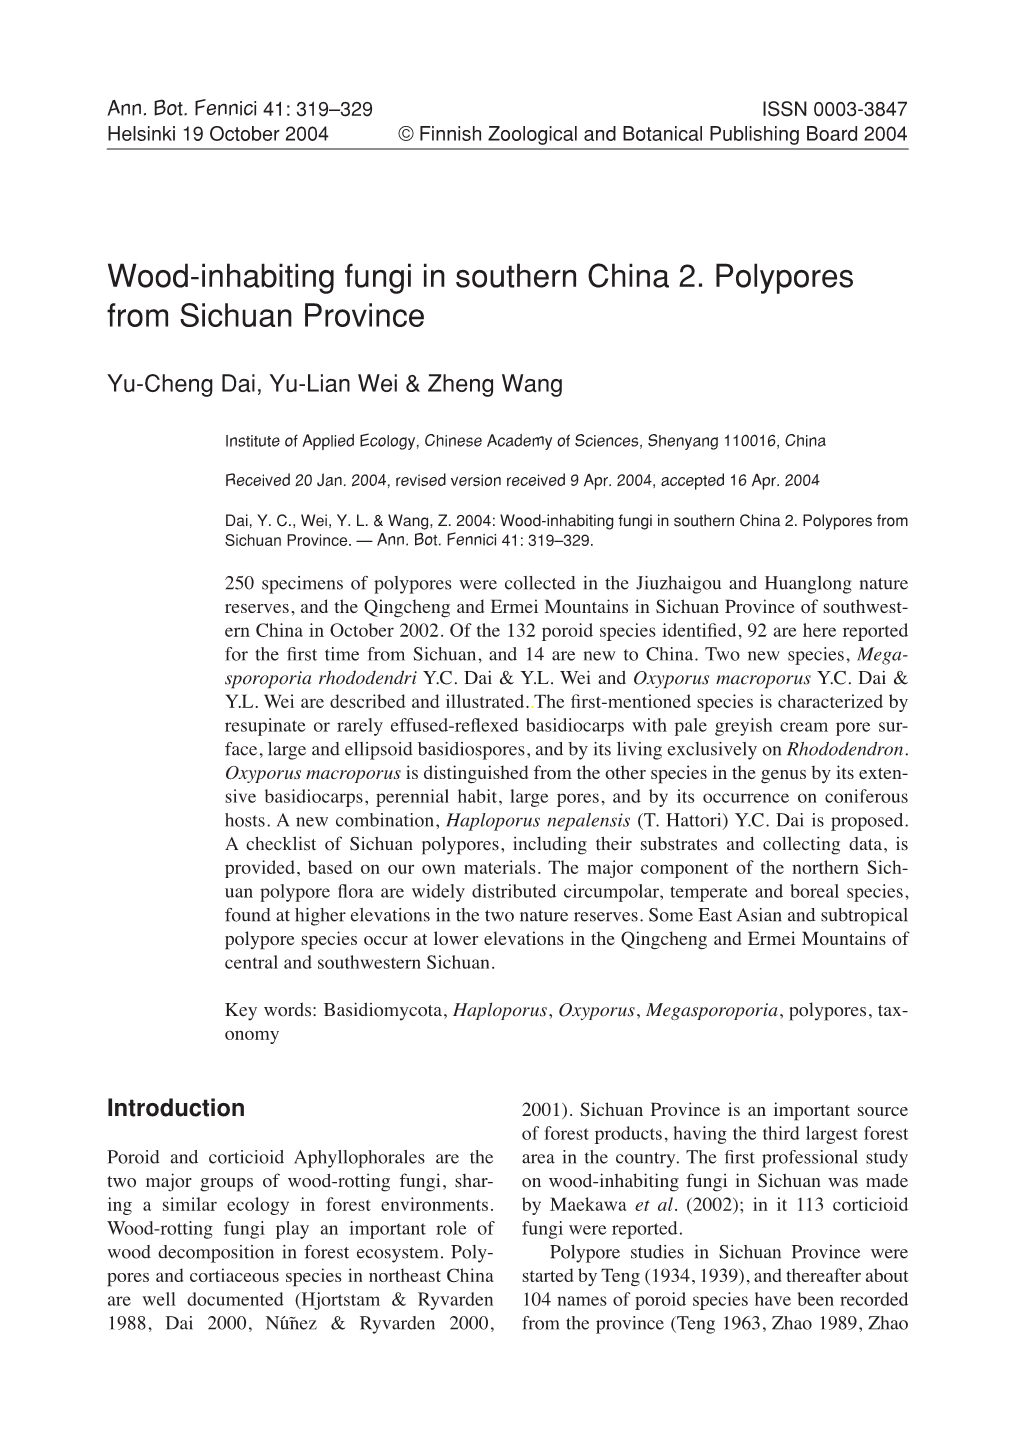 Wood-Inhabiting Fungi in Southern China 2. Polypores from Sichuan Province